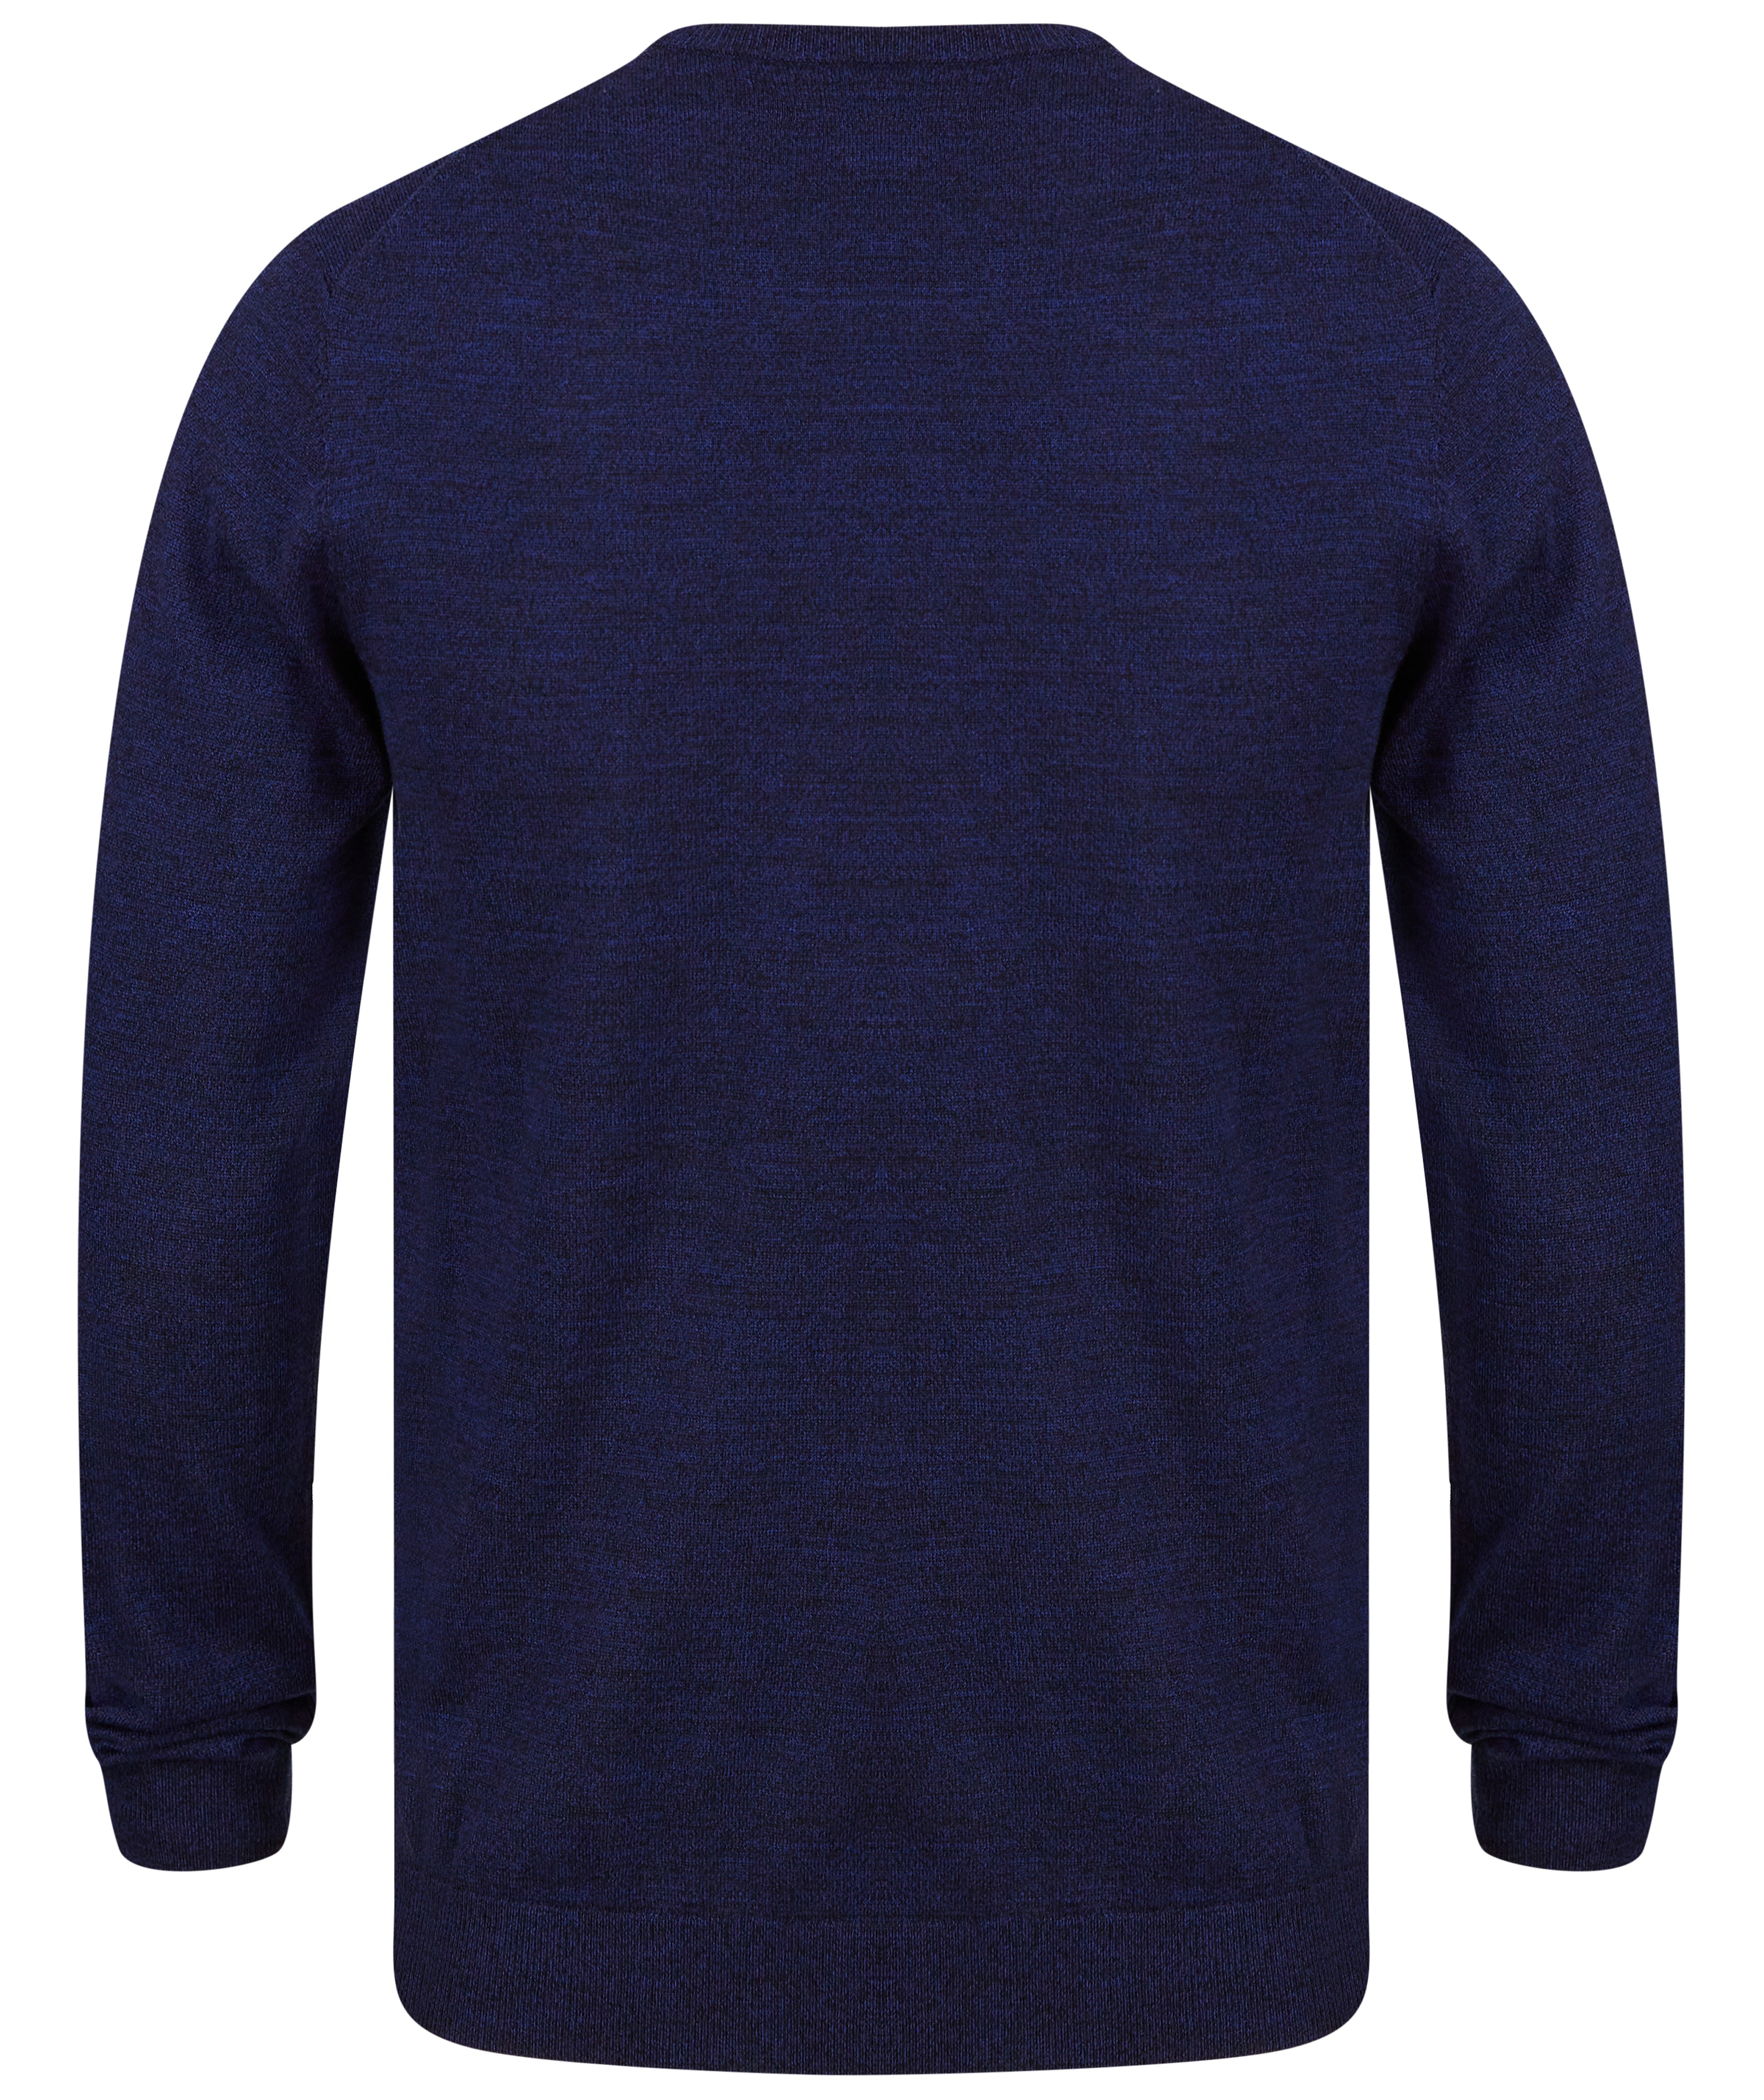 Load image into Gallery viewer, Matinique Margrate Merino Knit Blue
